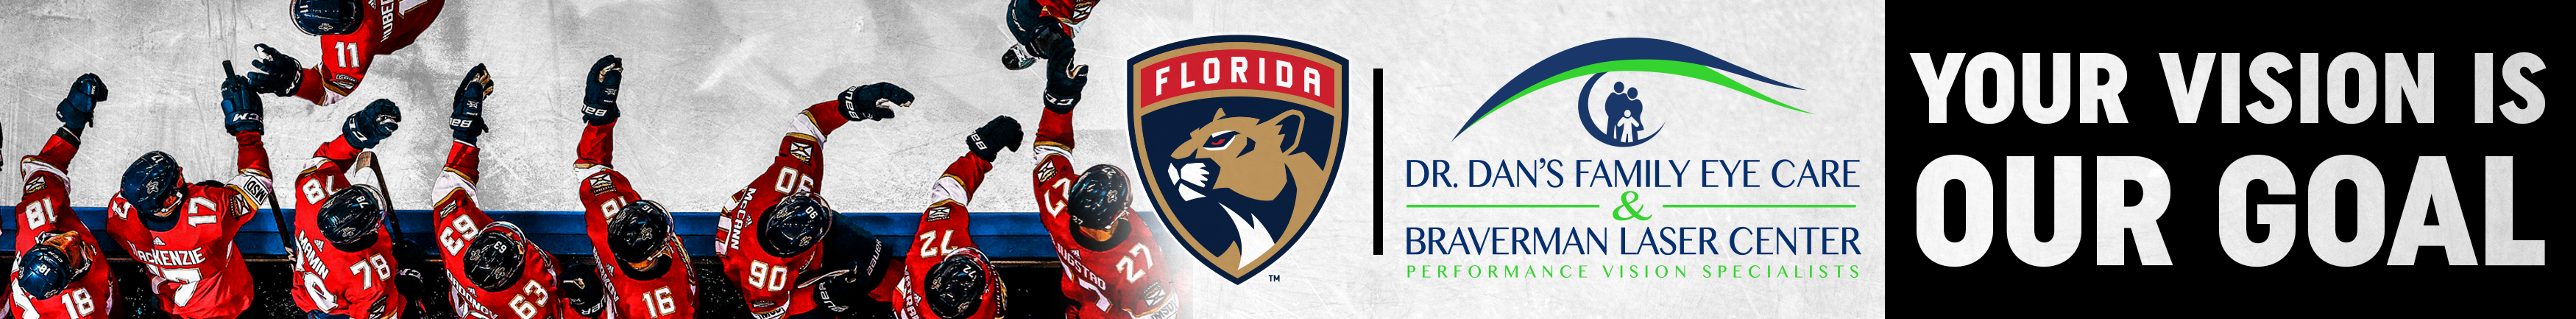 Official Eyecare provider of the Florida Panthers